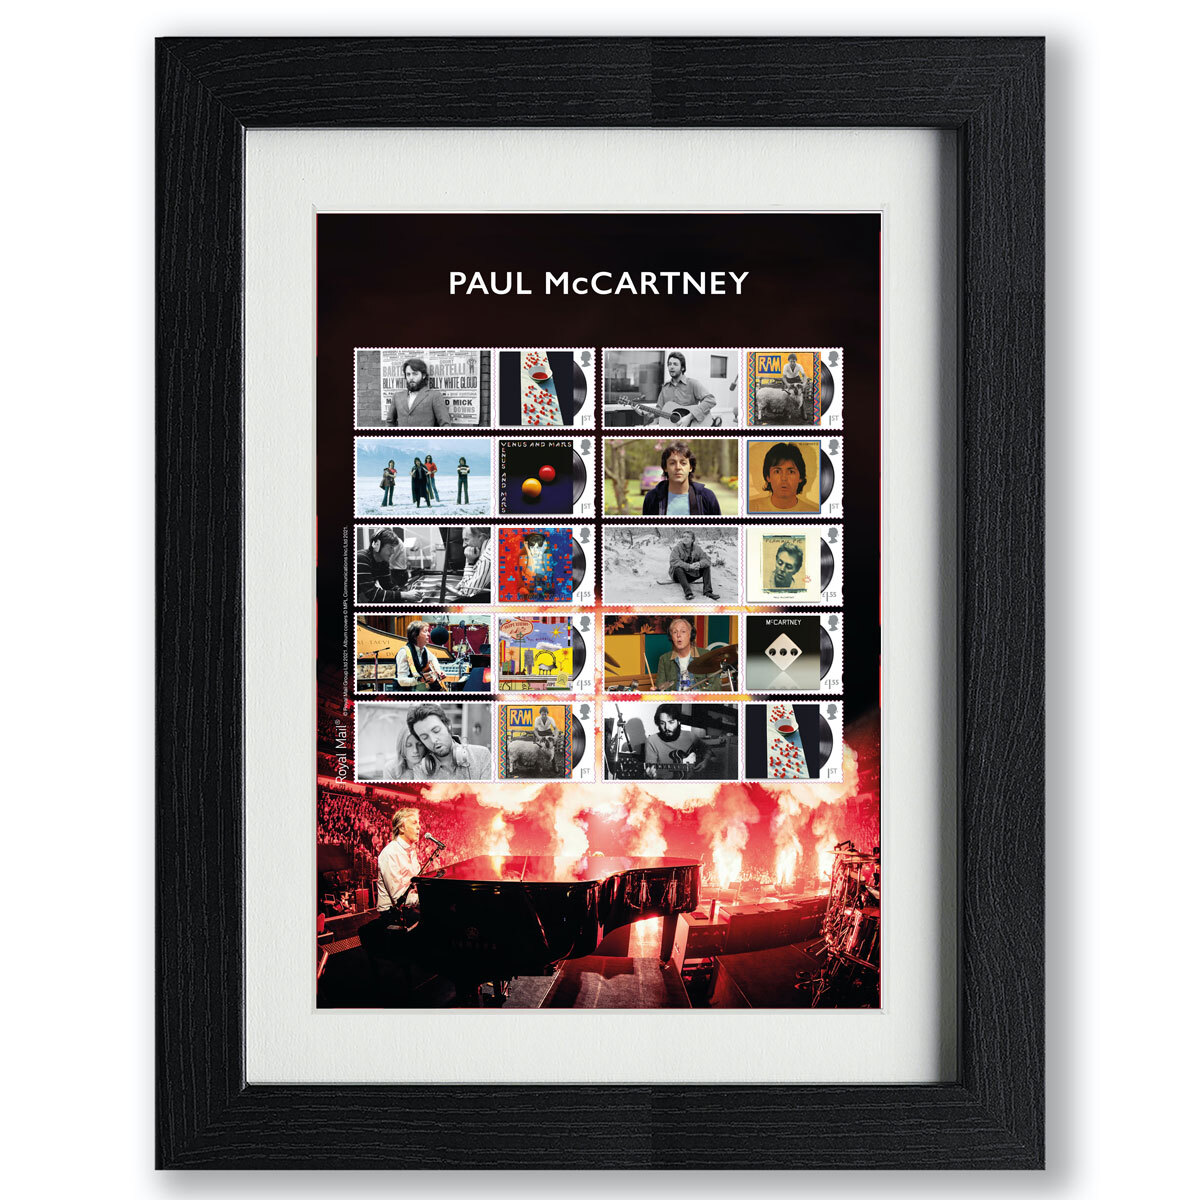 Buy Paul McCartney Framed Album Covers Collectors Sheet Frame Image at costco.co.uk